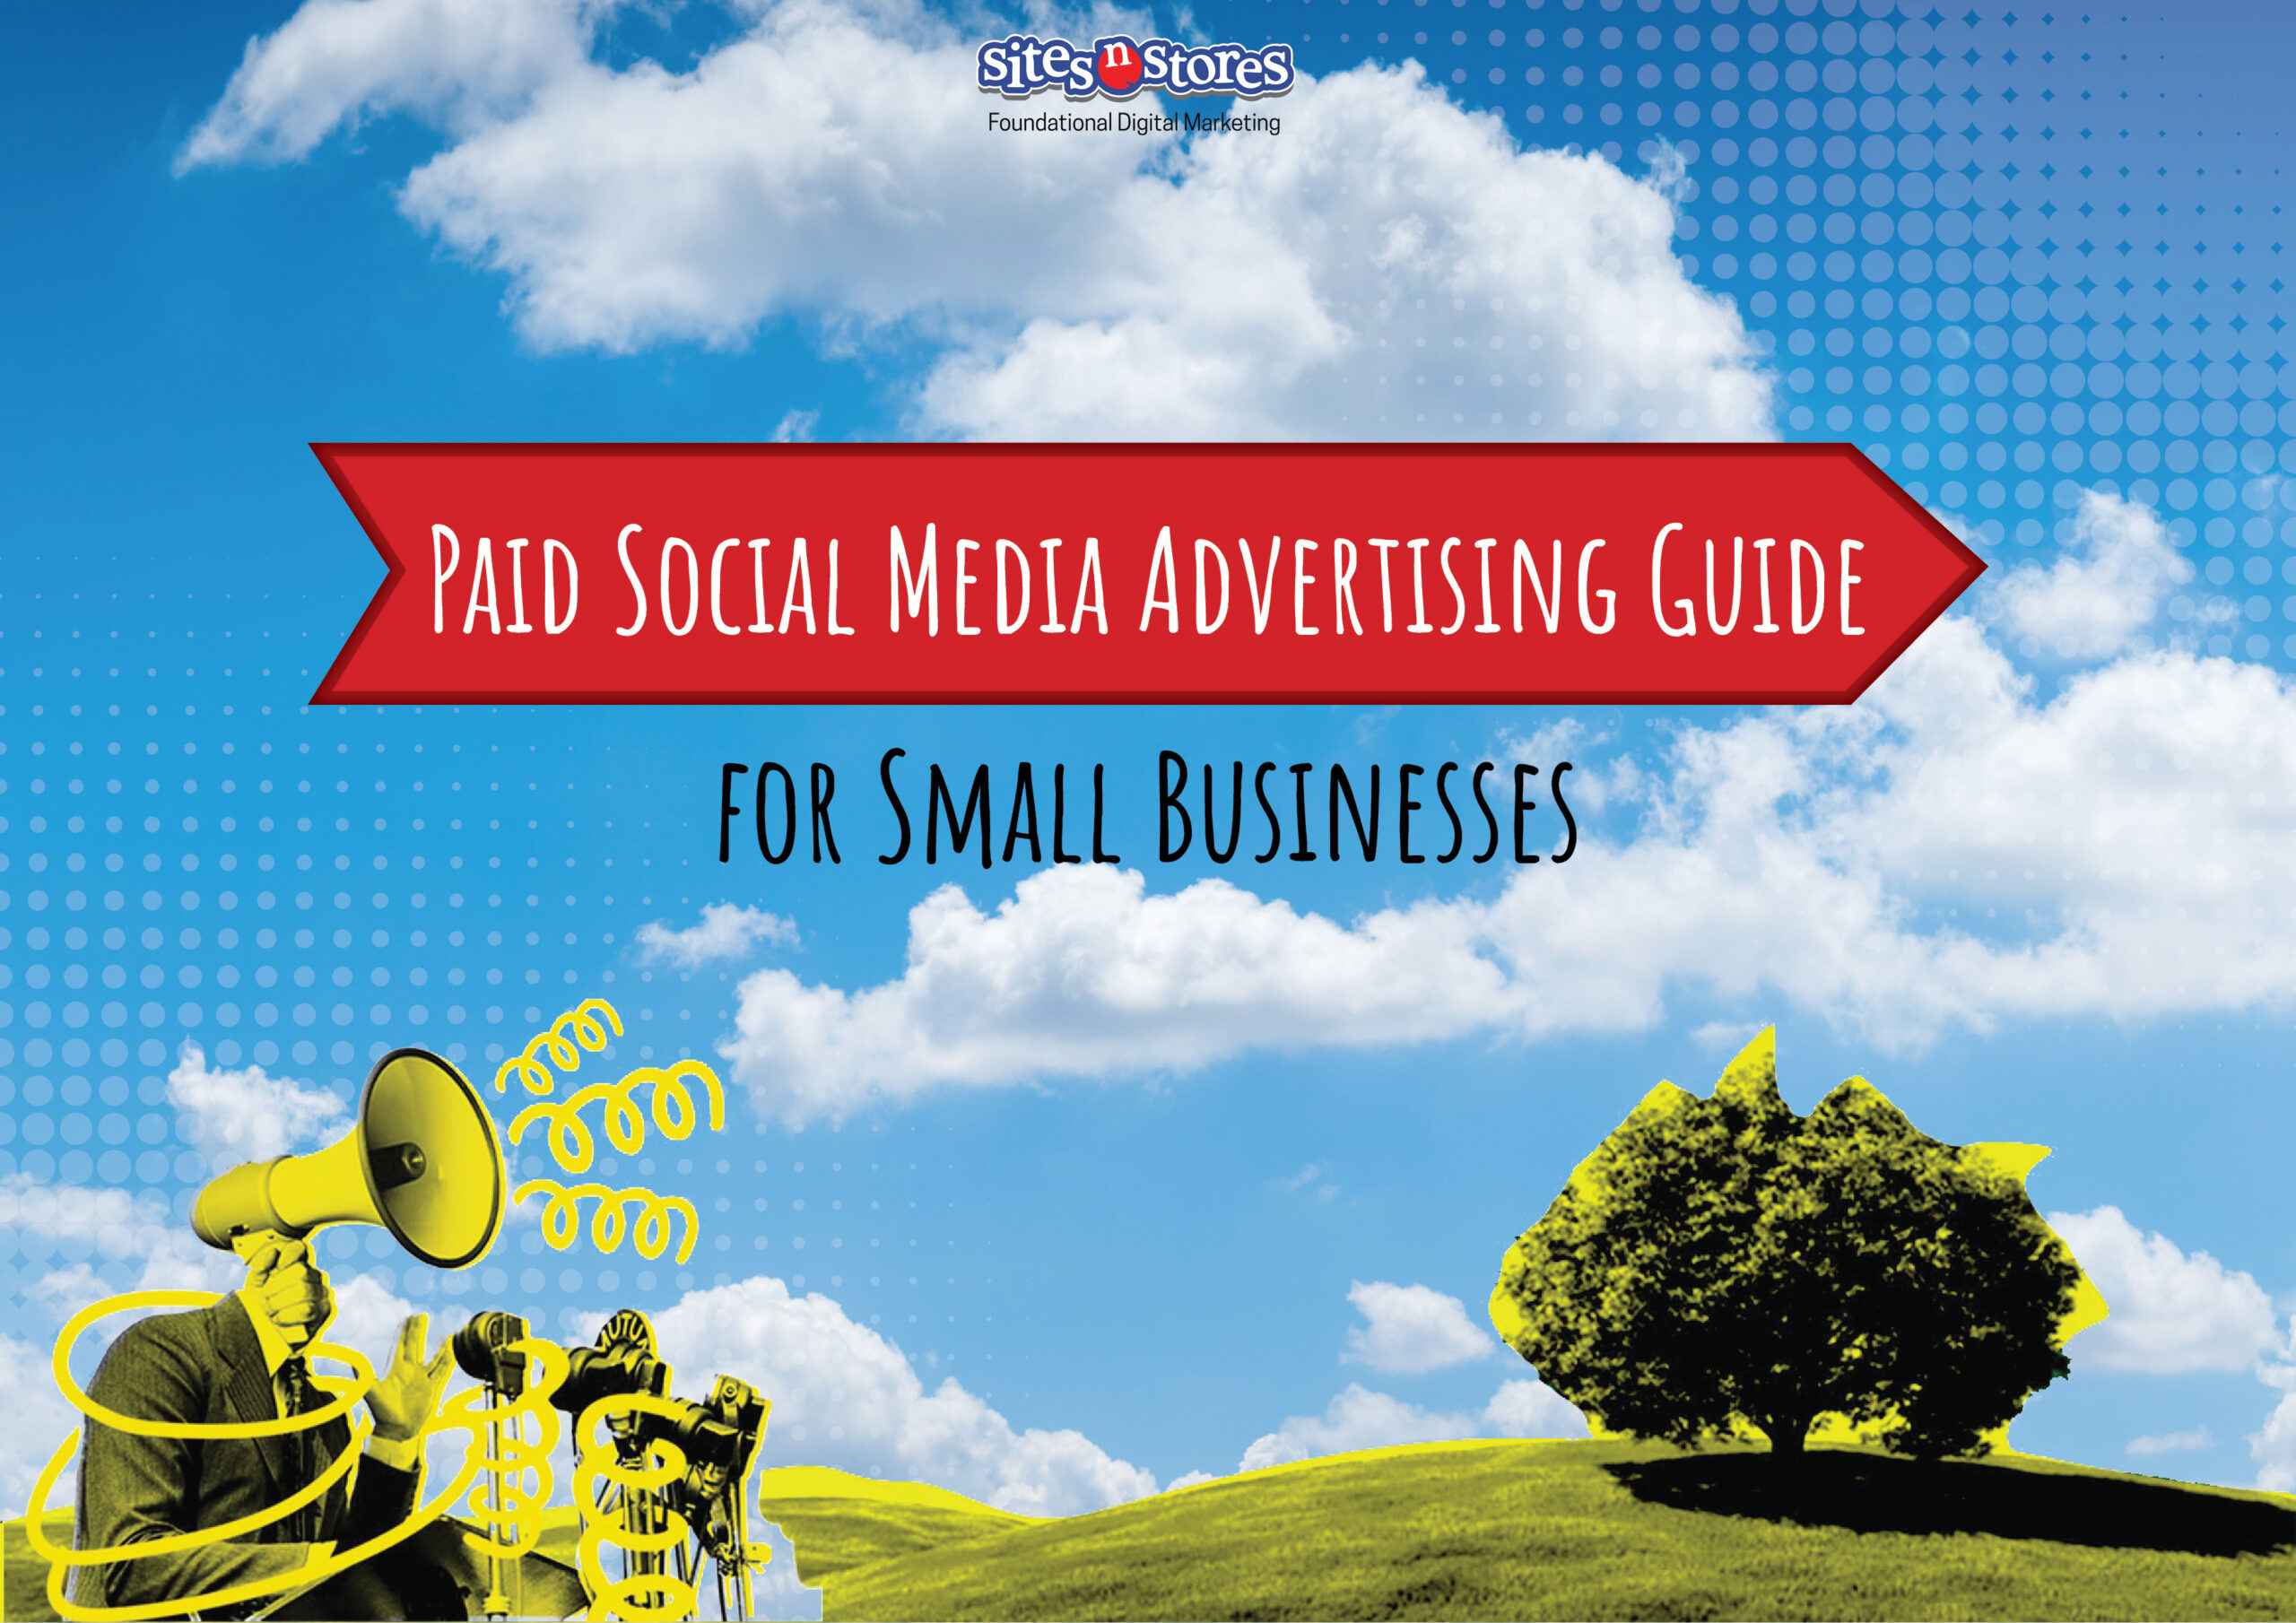 Paid Social Media Advertising Guide for Small Businesses